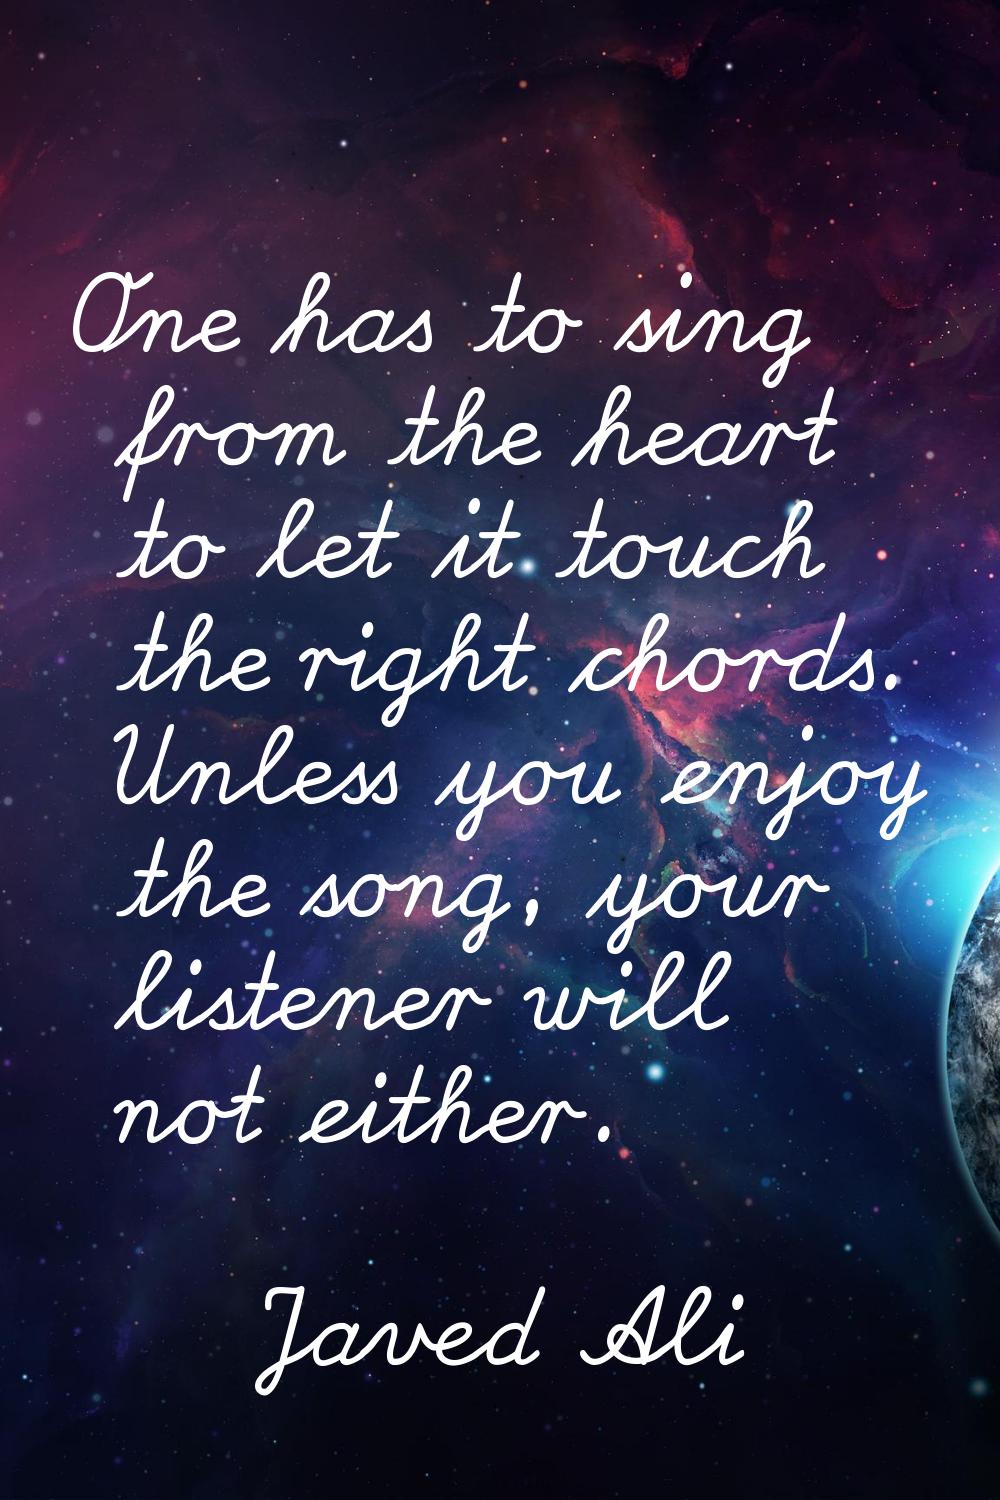 One has to sing from the heart to let it touch the right chords. Unless you enjoy the song, your li